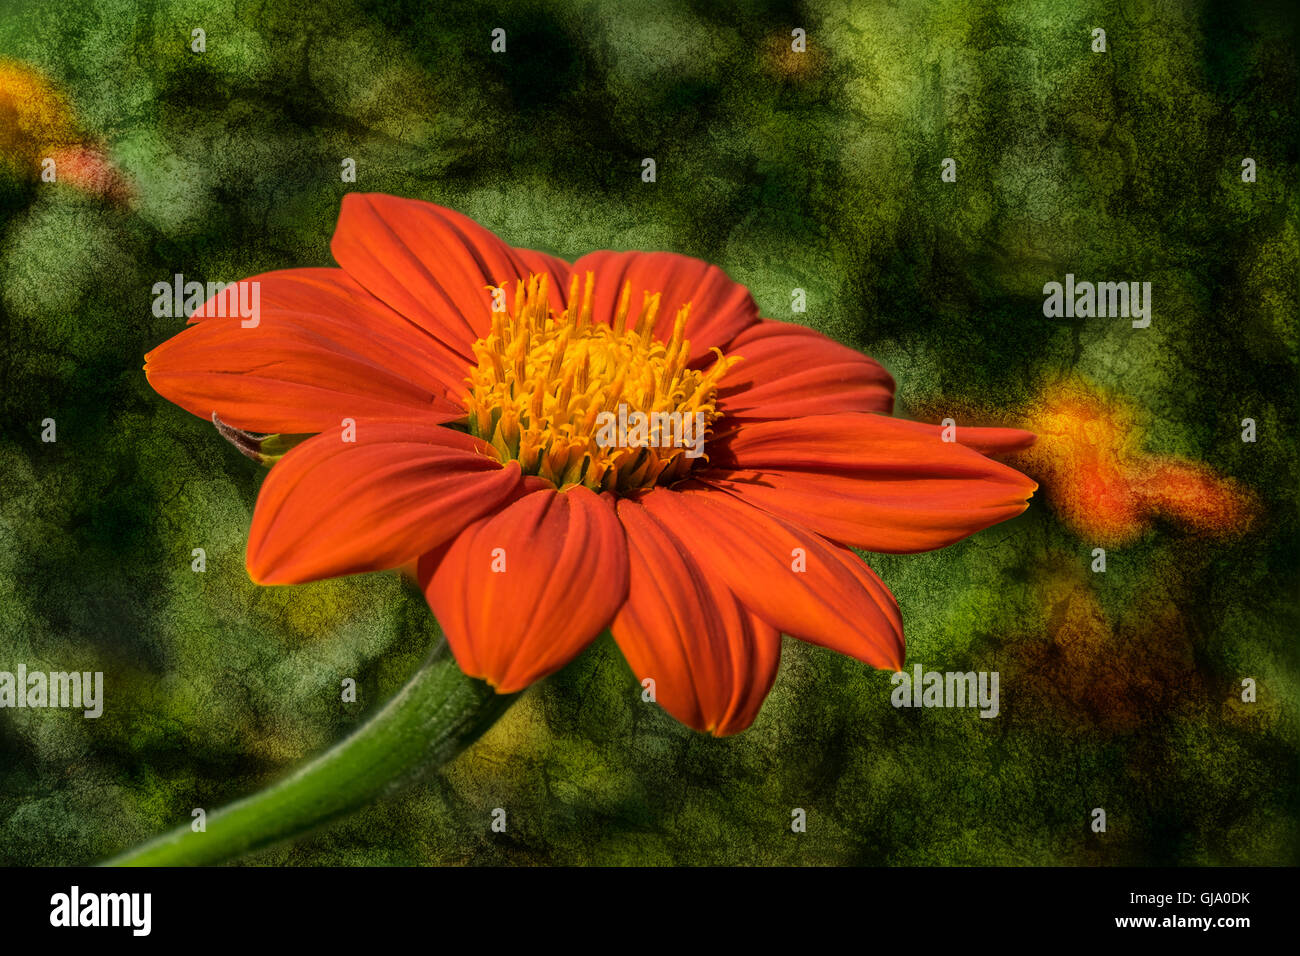 Beautiful orange Mexican Sunflower, Latin name Tithonia rotundifolia, isolated contrasted against a textured dark green backgrou Stock Photo